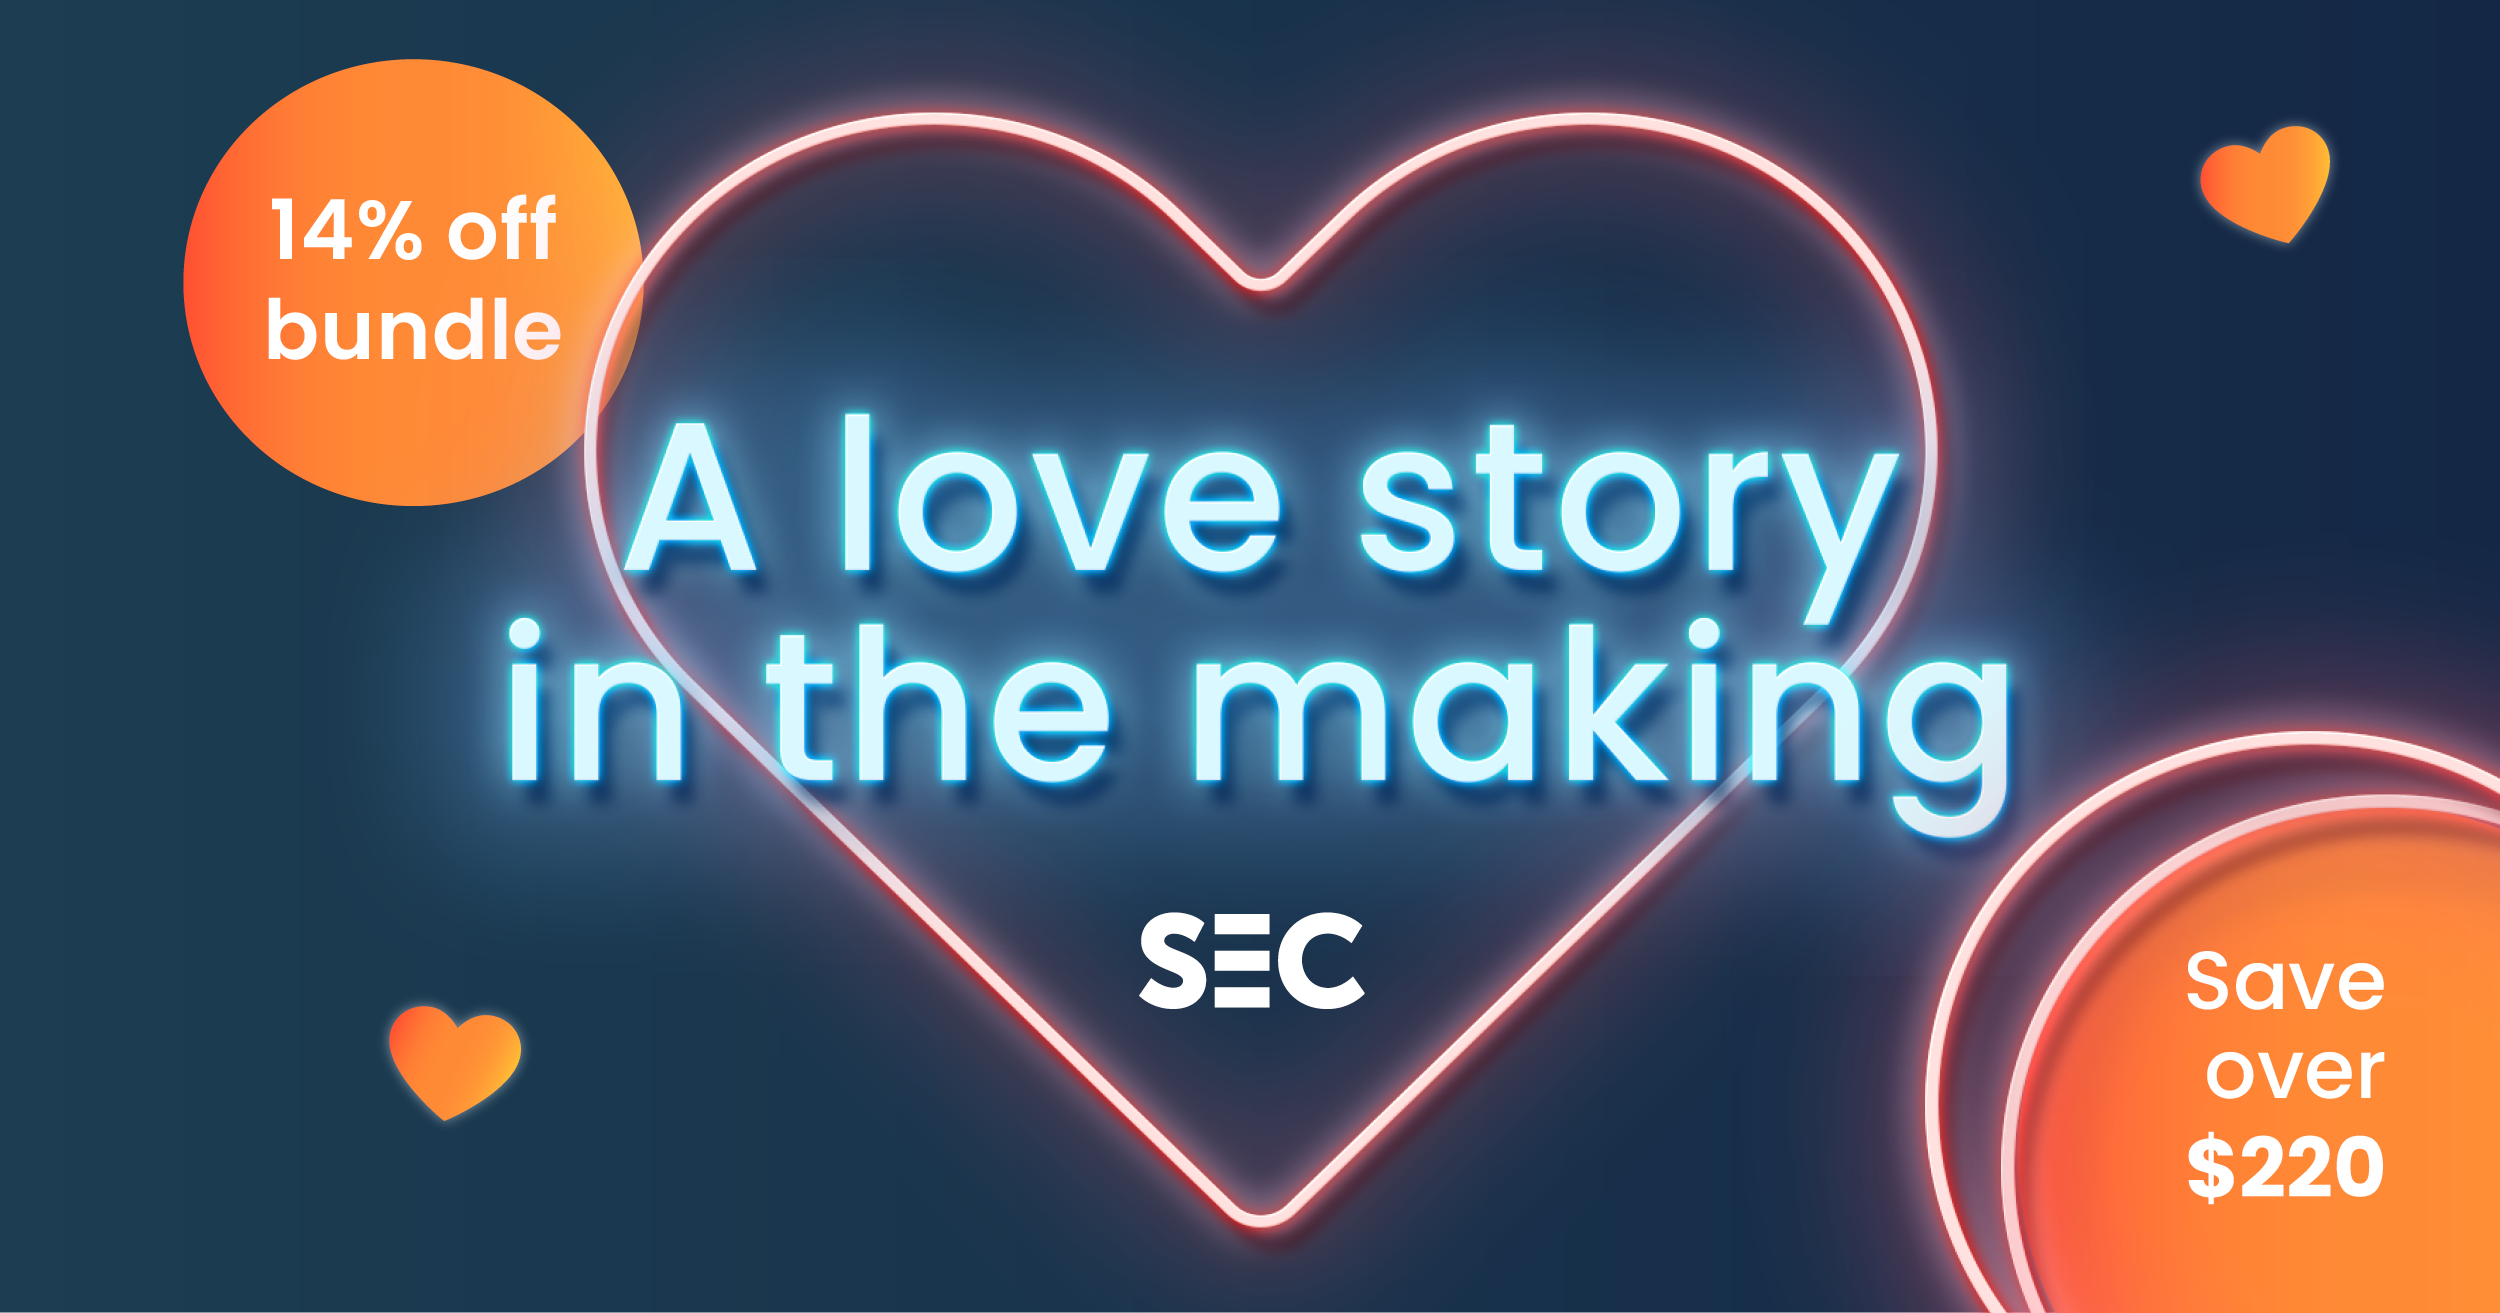 A love story in the making - 14% off bundle, save over $220